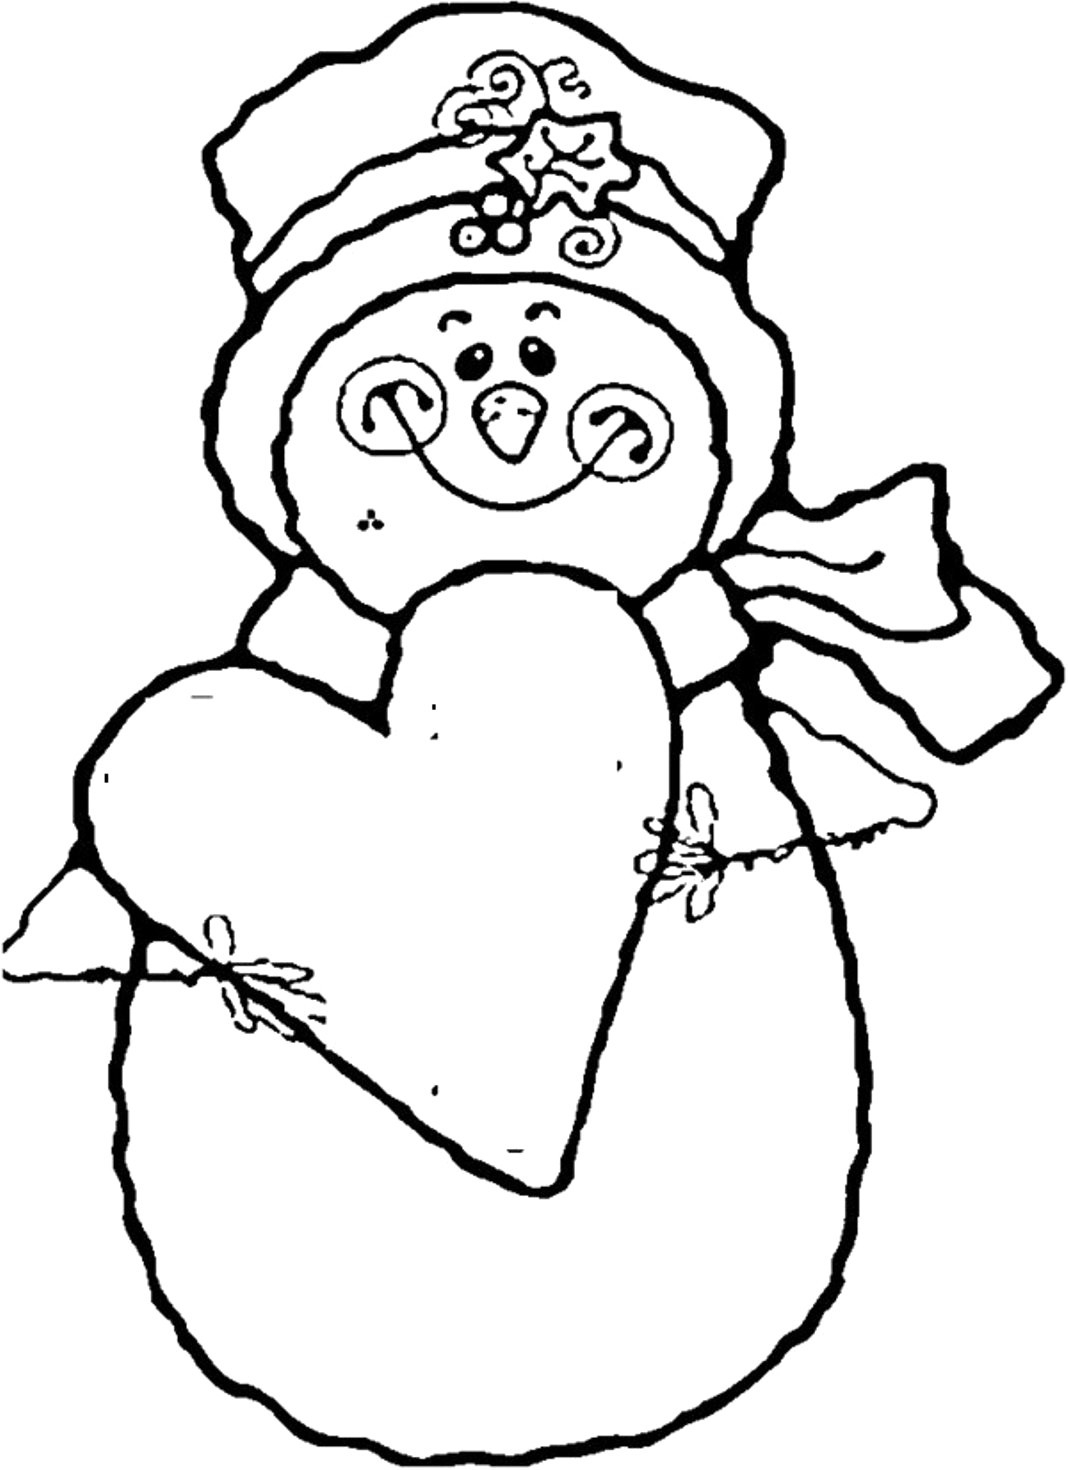 Coloring Pages Of Snowmen Coloring Staggering Snowman Coloring Sheet